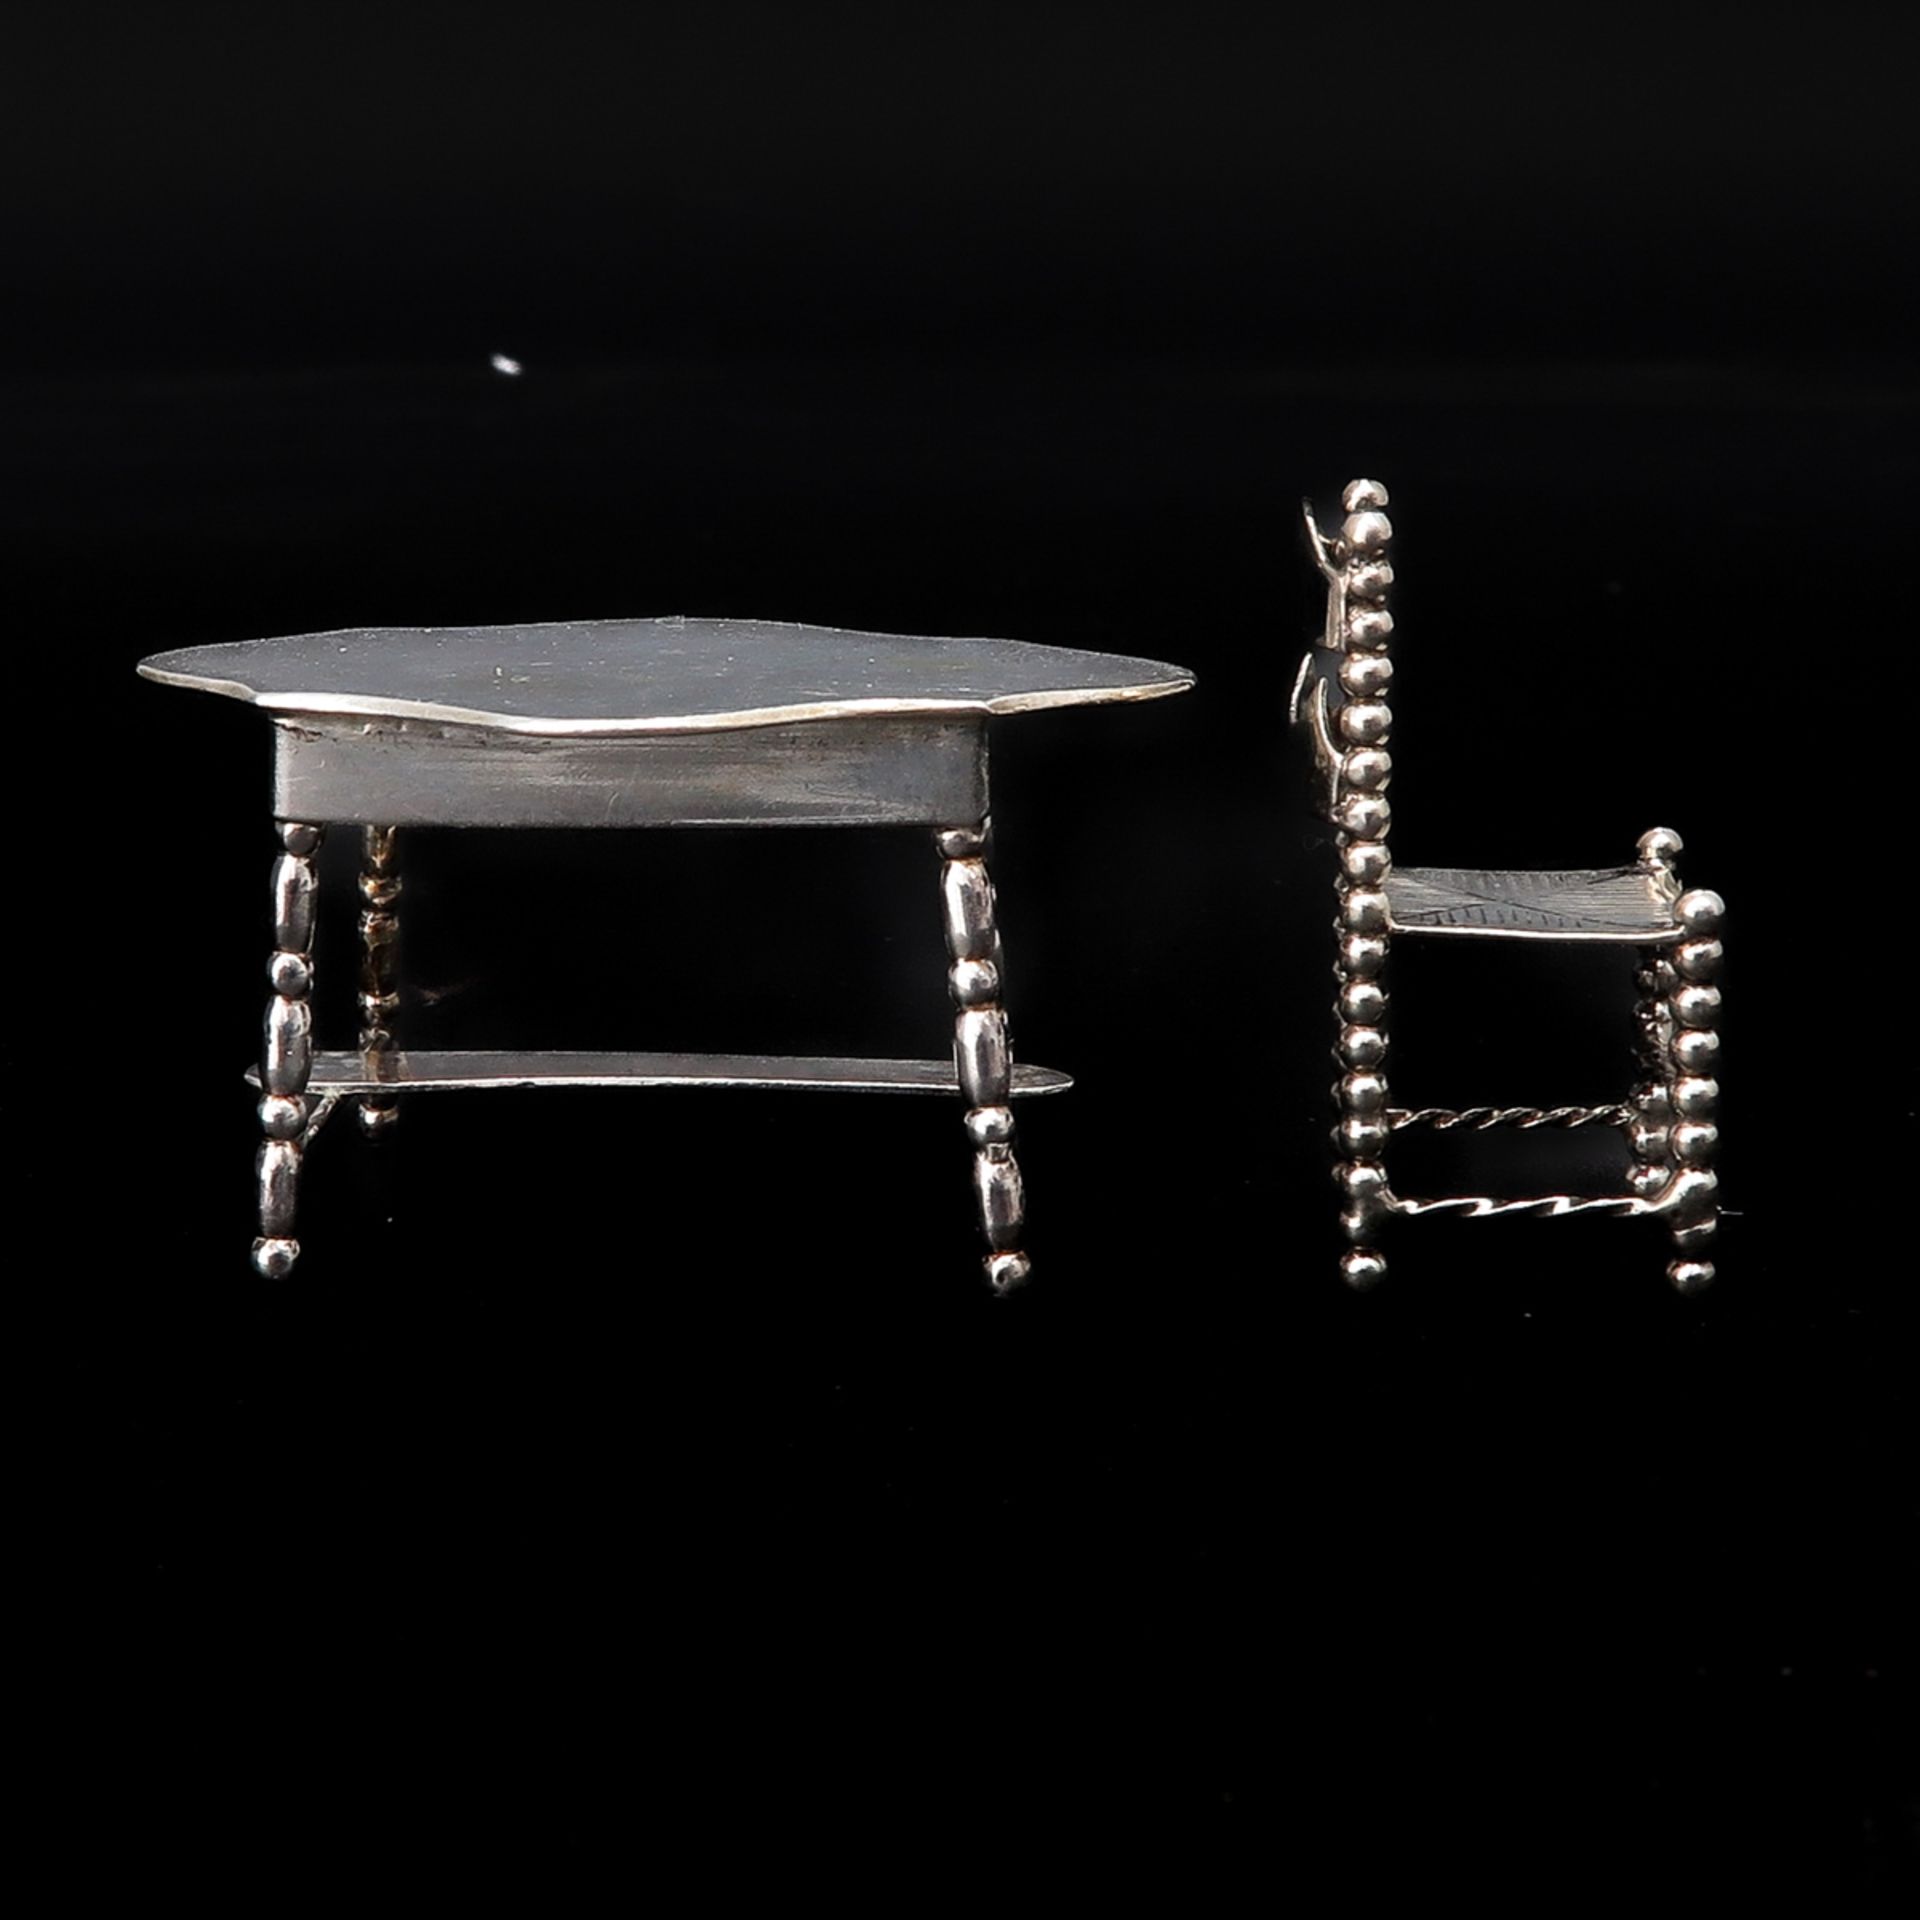 A Miniature Silver Table and Chair - Image 3 of 7